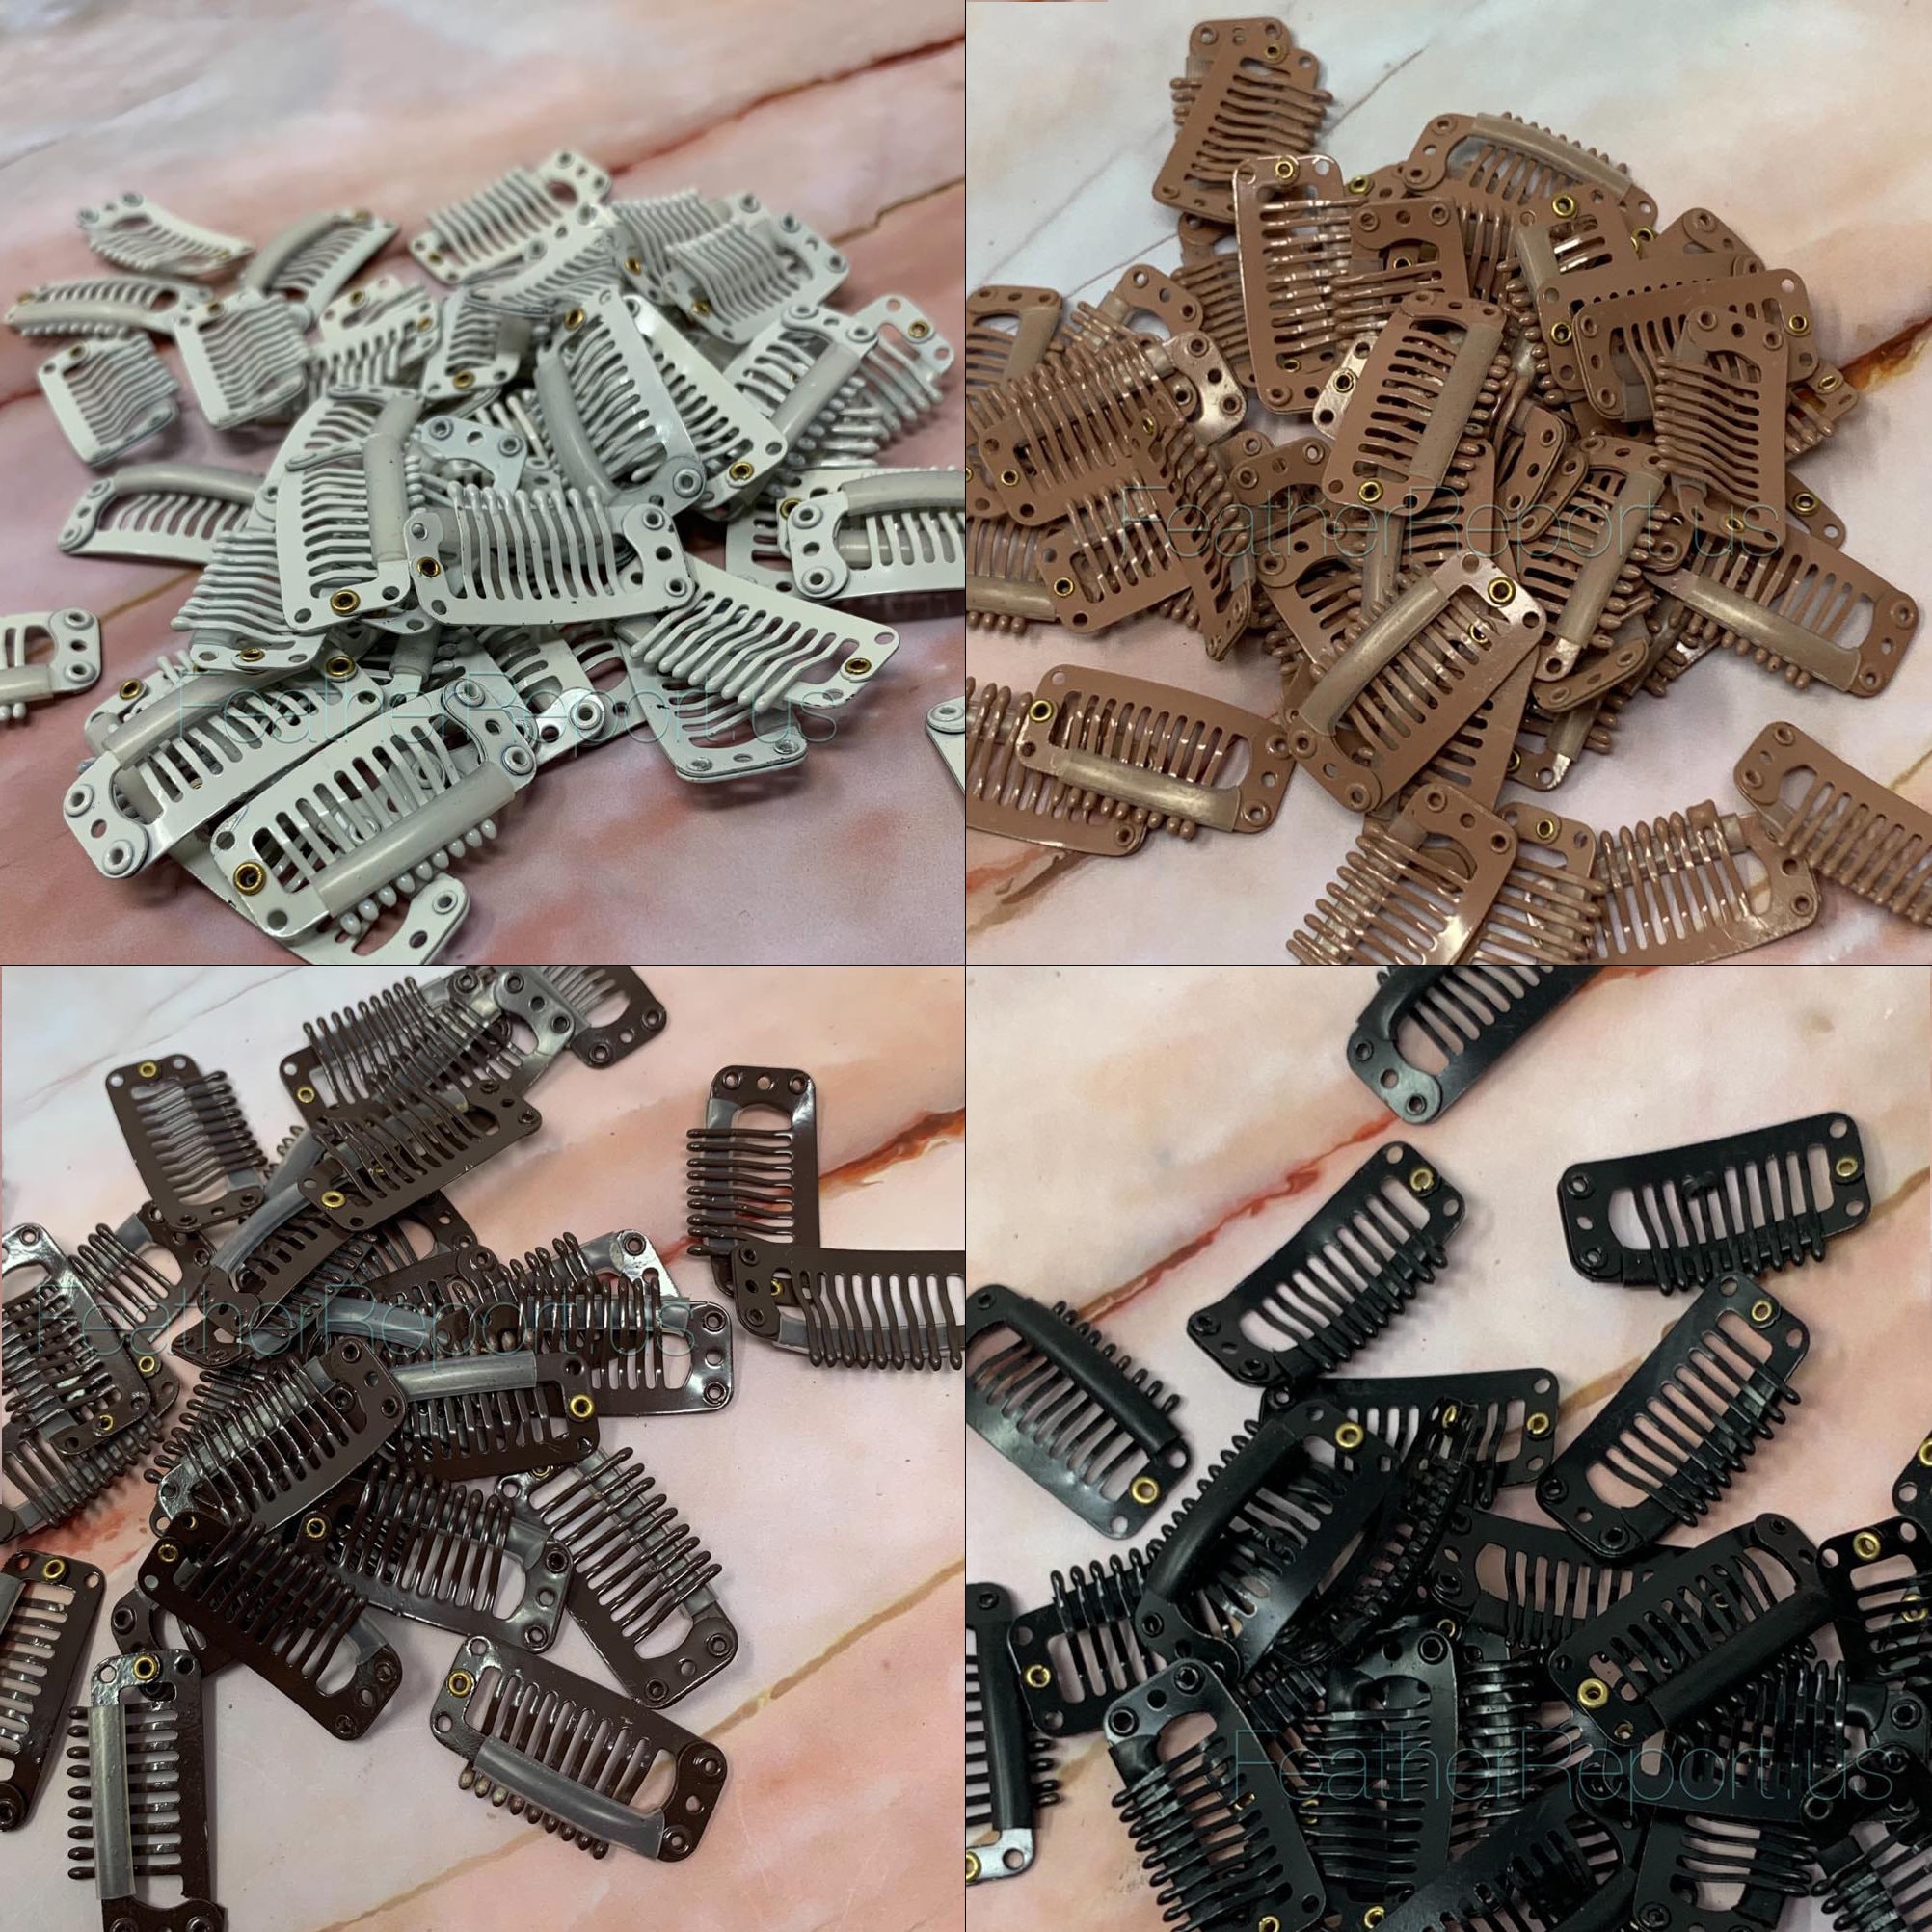  Metal Wig Clips Wig Hair Extension Clips Wig Snap Clips  9-Teeth Wig Clips to Sew in Wig Clips to Secure Wig Hair Clips for Hairpiece  Wig Accessories Clips (D) 